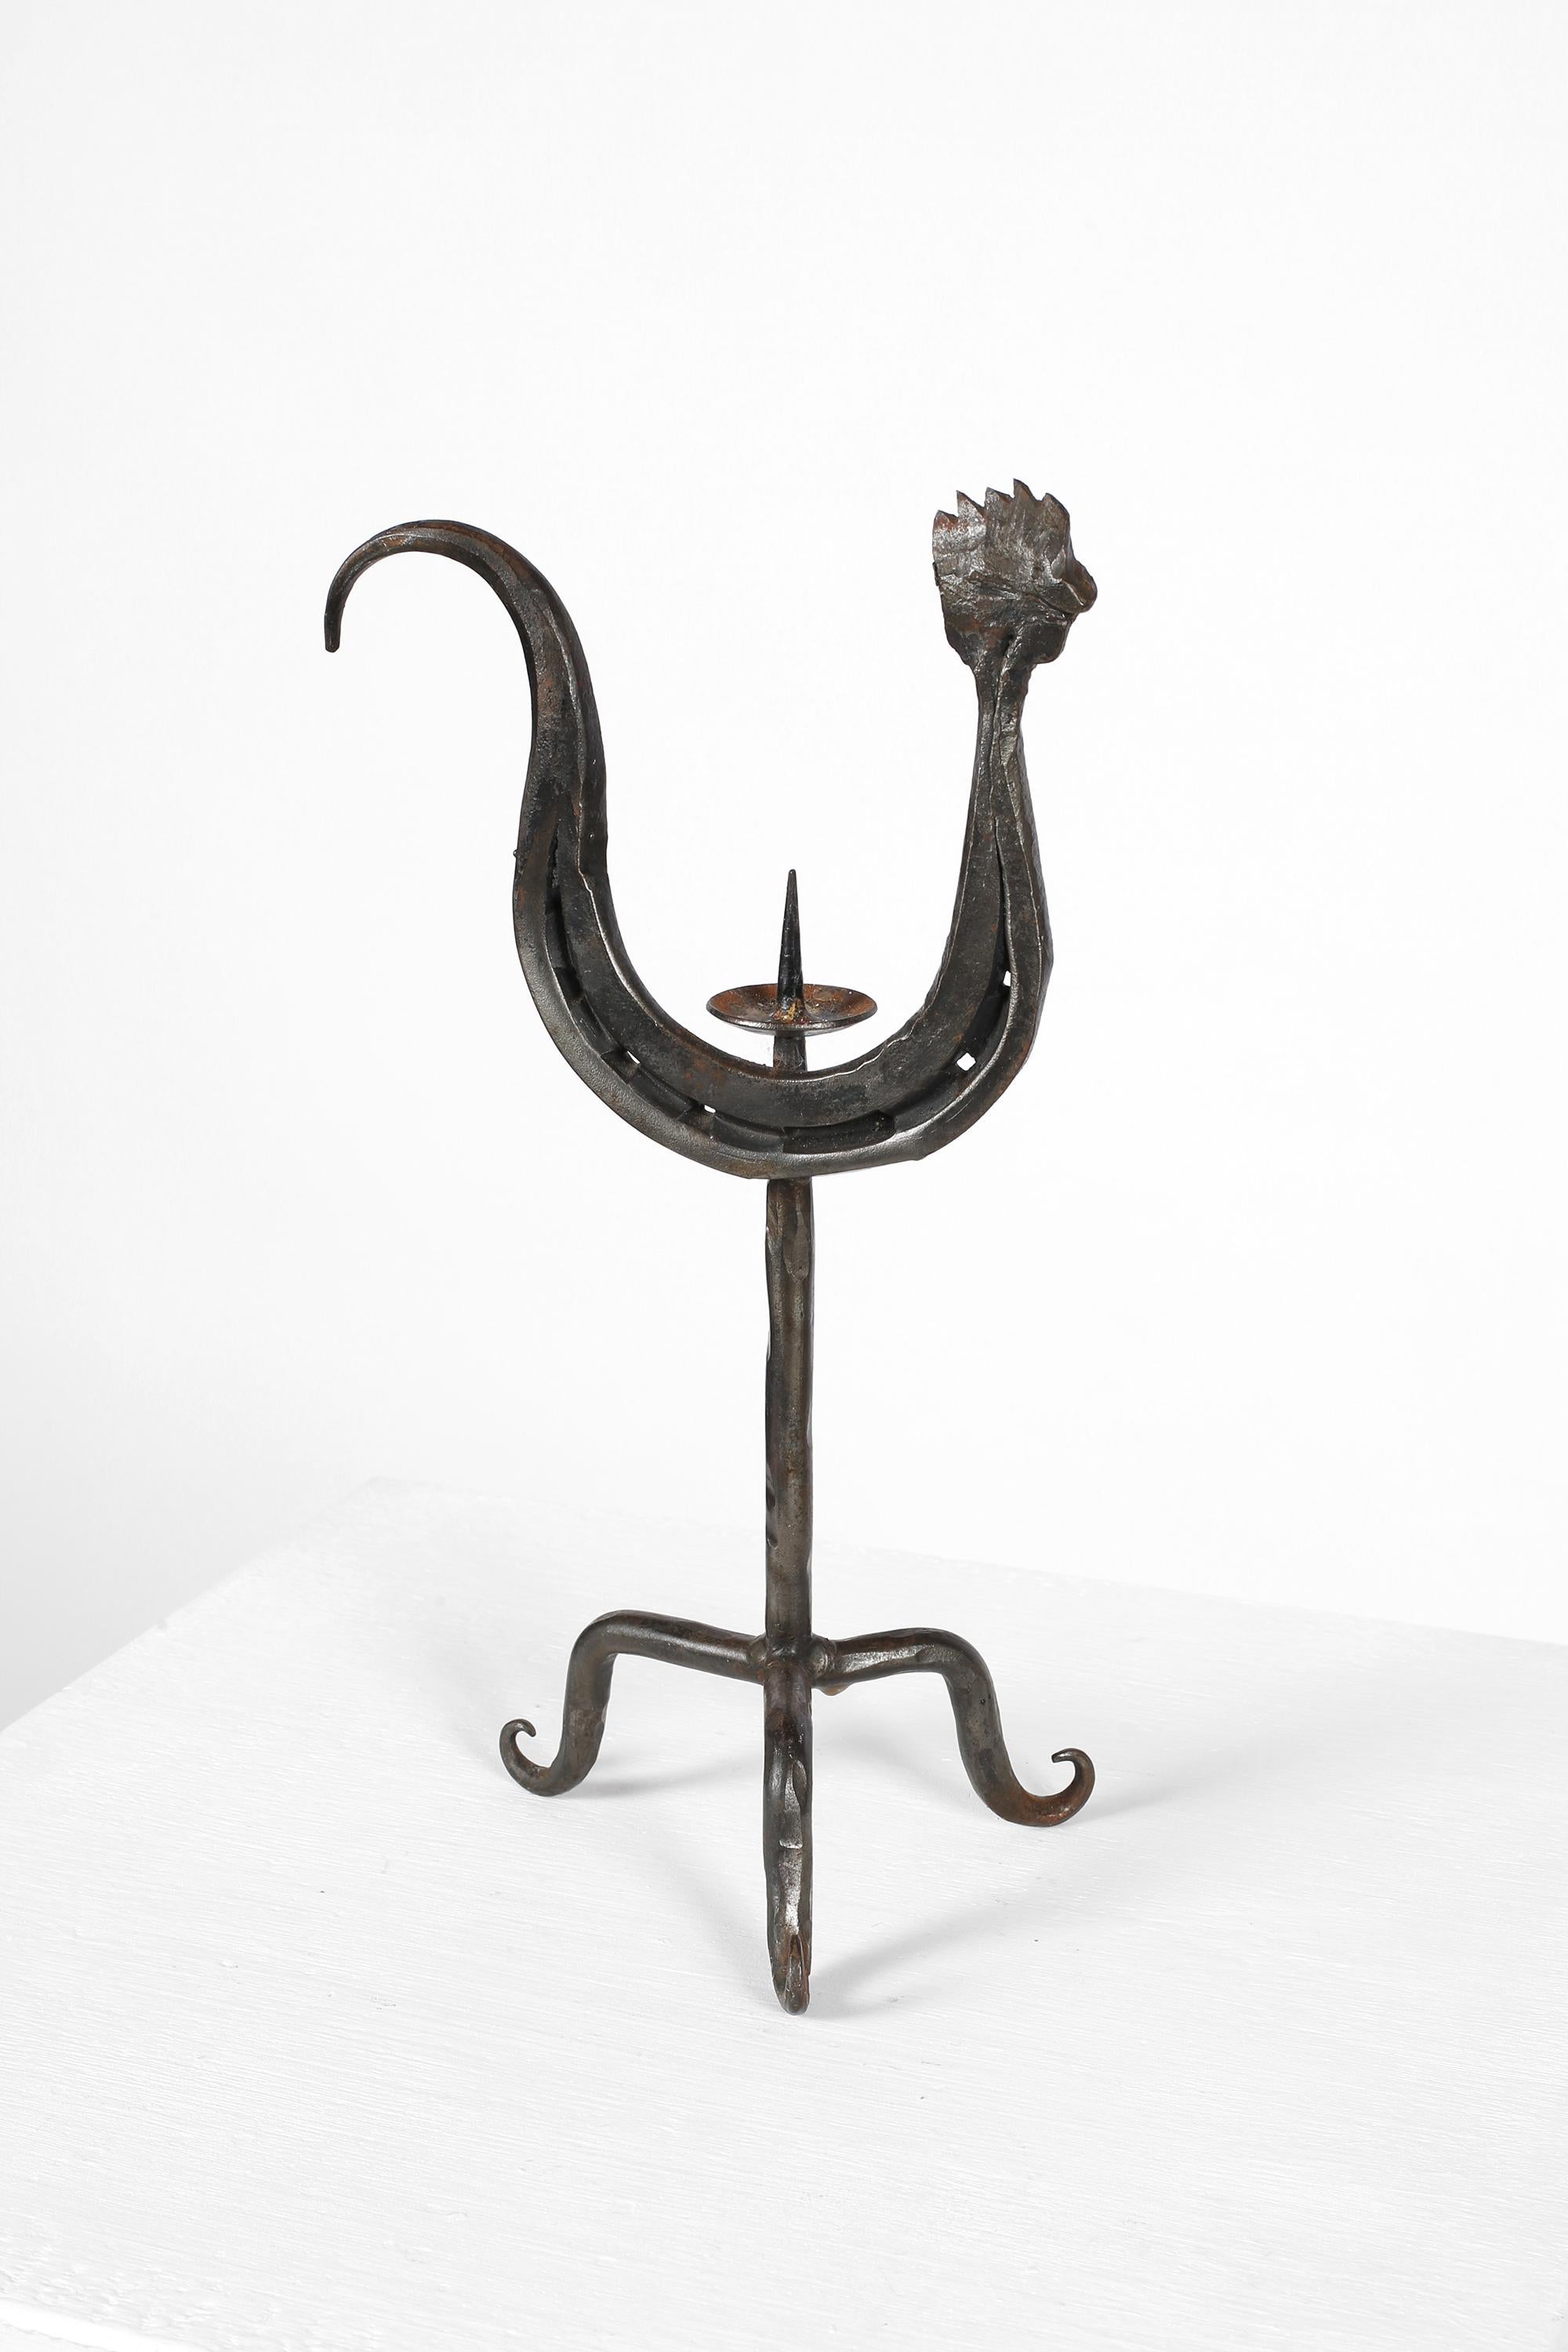 A hand forged zoomorphic iron candlestick stylised as a cockerel on a three point base. In the manner of work by Jean Touret and Les Artisans de Marolles. French, c. 1950s. 